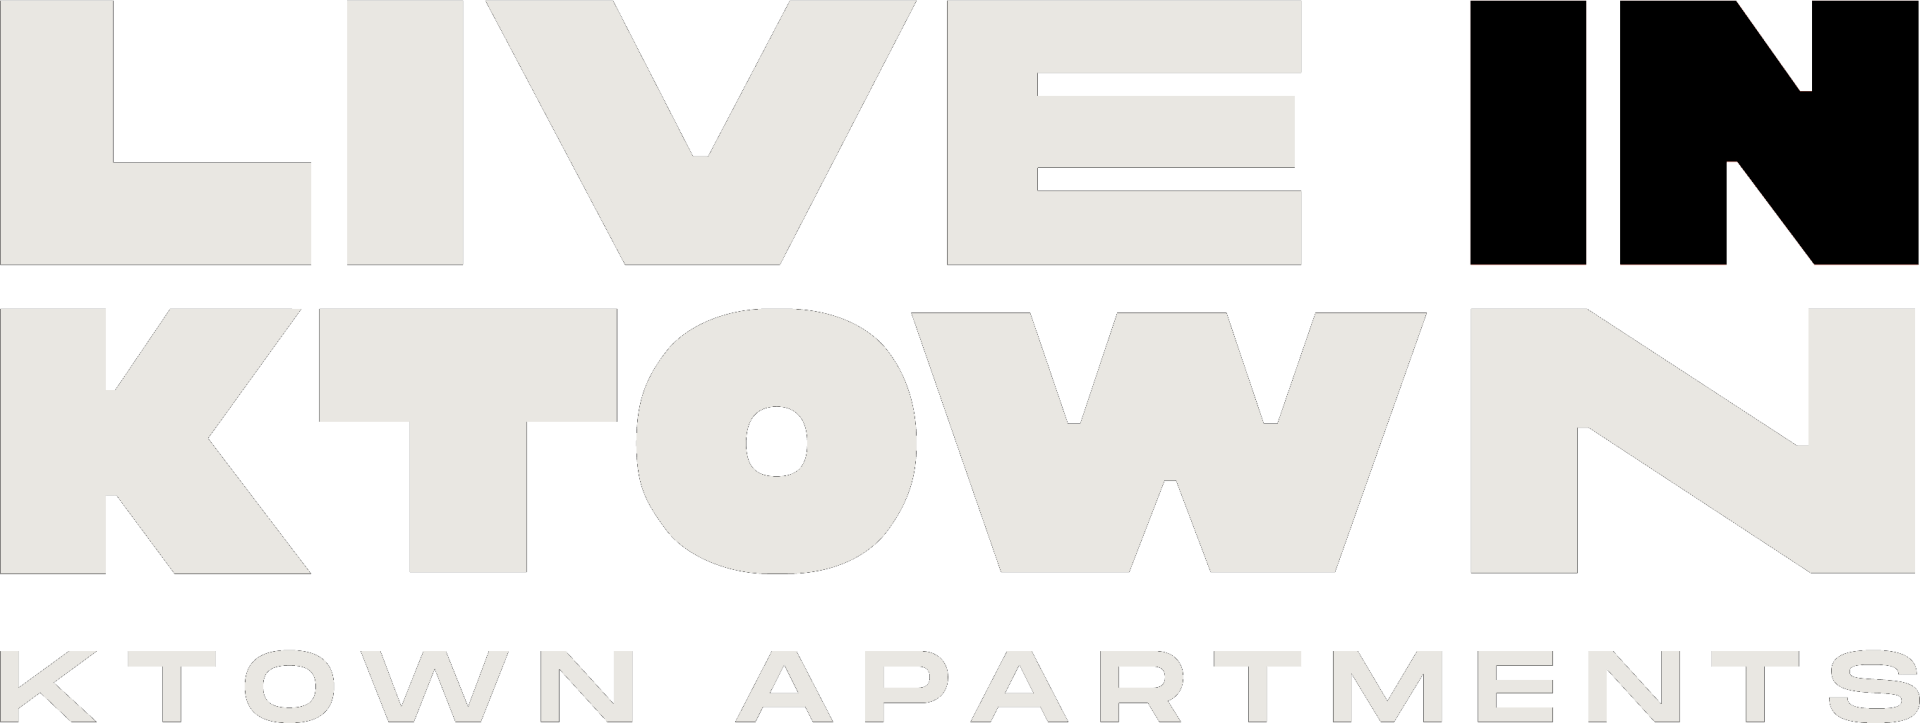 Live in KTown Apartments logo